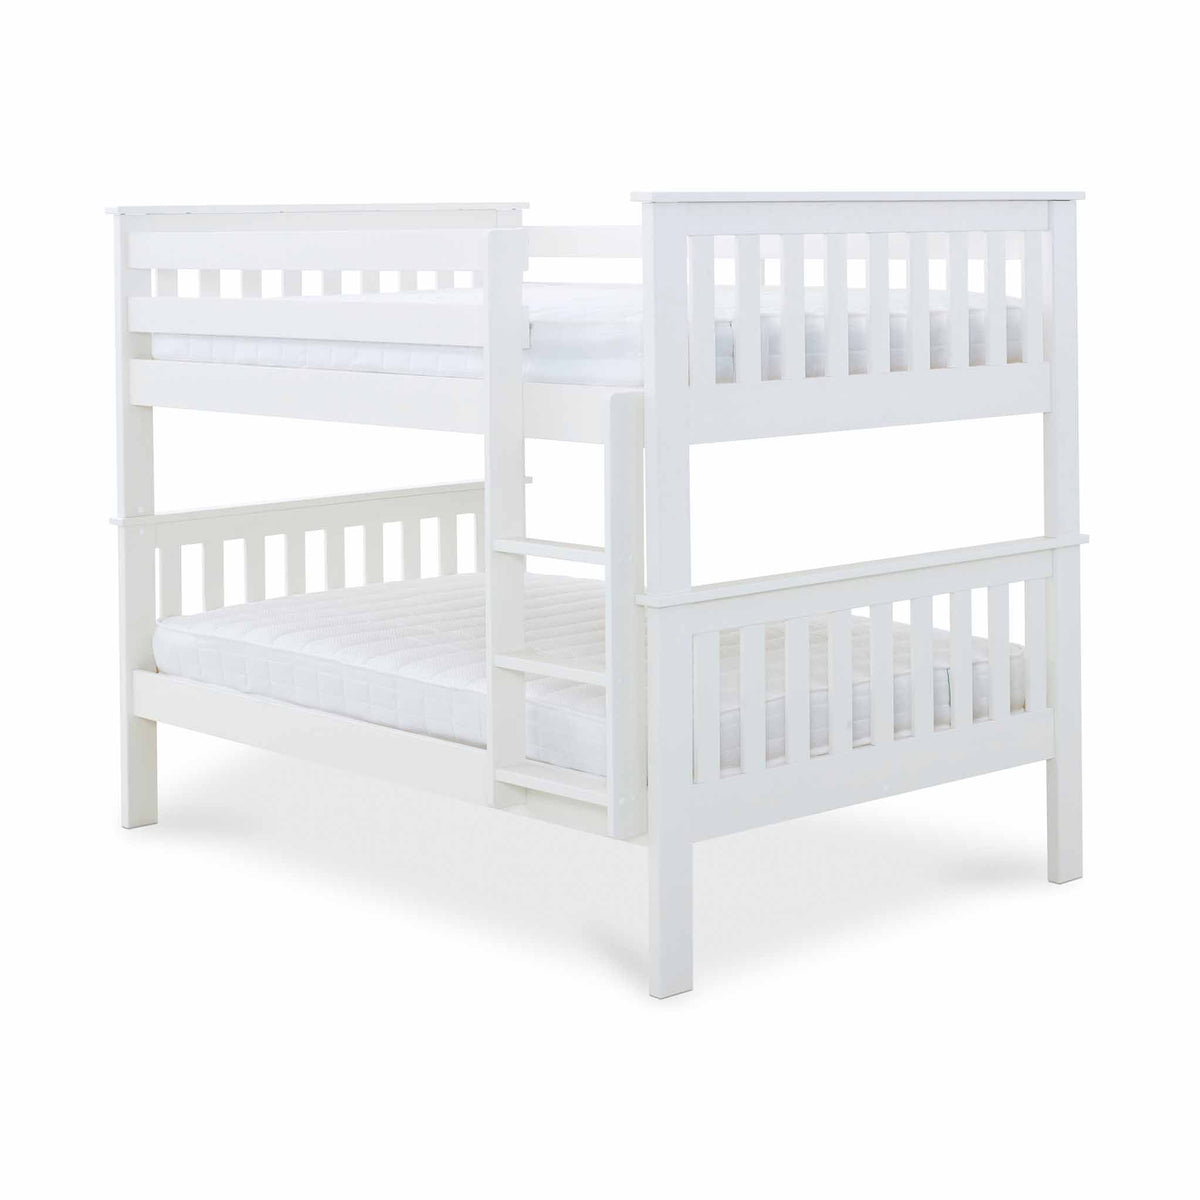 Quad Small Double Bunk Bed from Roseland Furniture